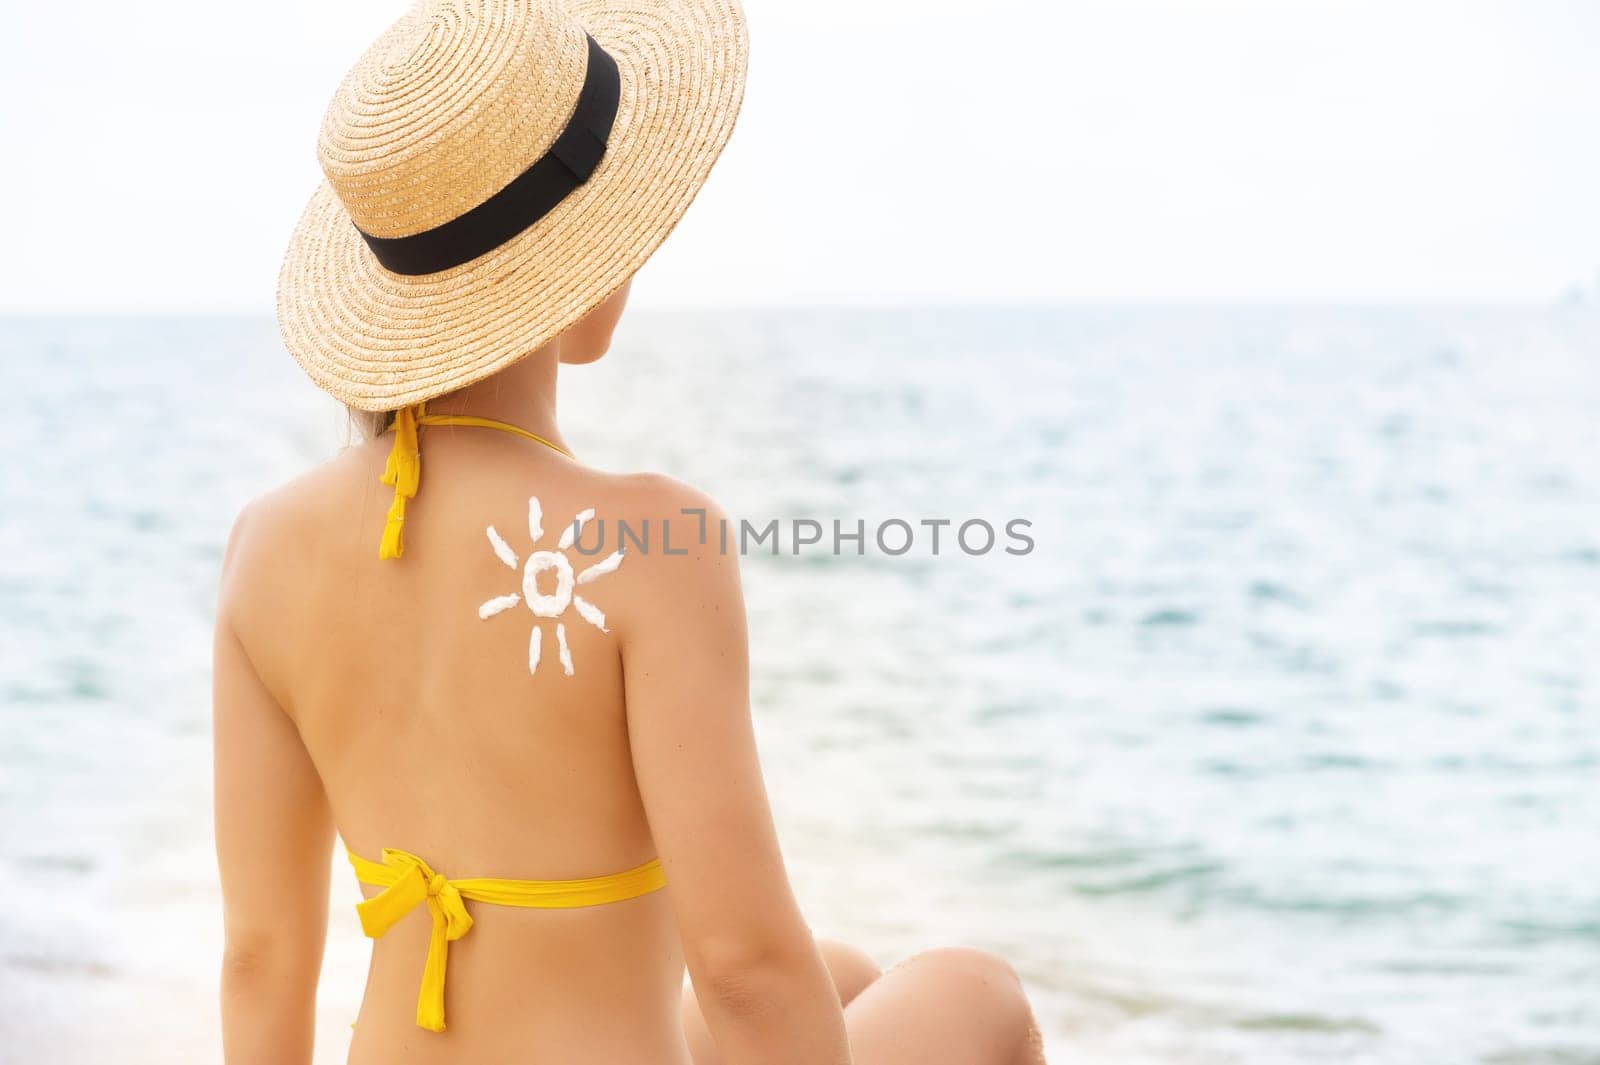 Caucasian girl with sun-shaped sunscreen on her shoulder on a sandy beach. Beautiful young woman sitting by the sea on vacation, sunbathing.